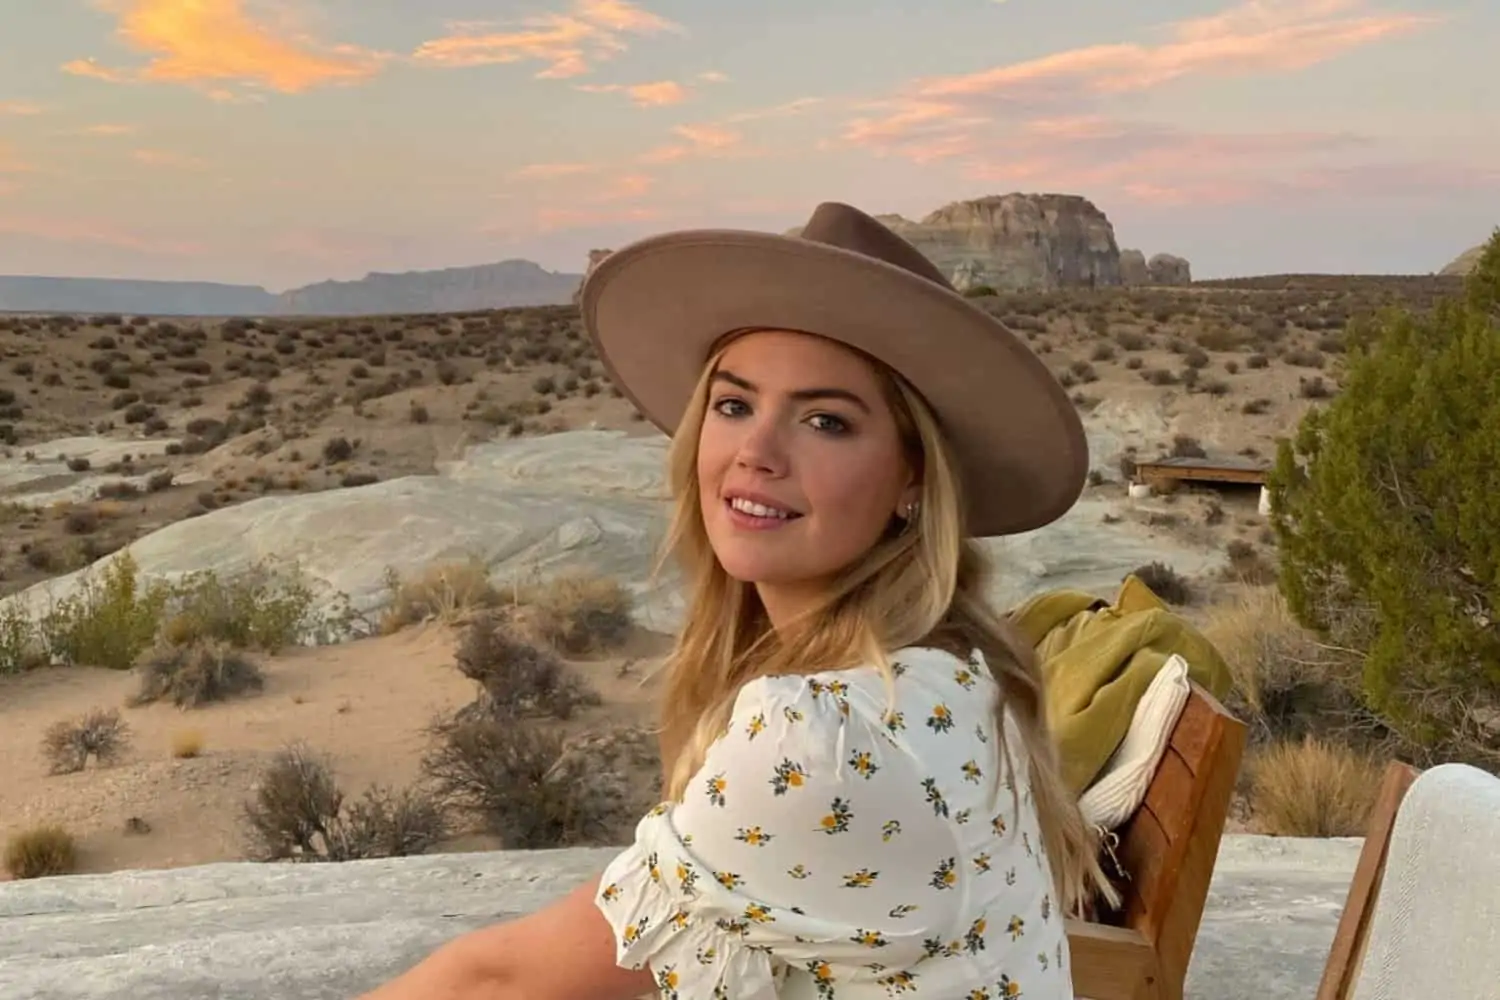 How Kate Upton became one of the first models to use the internet to aid her success